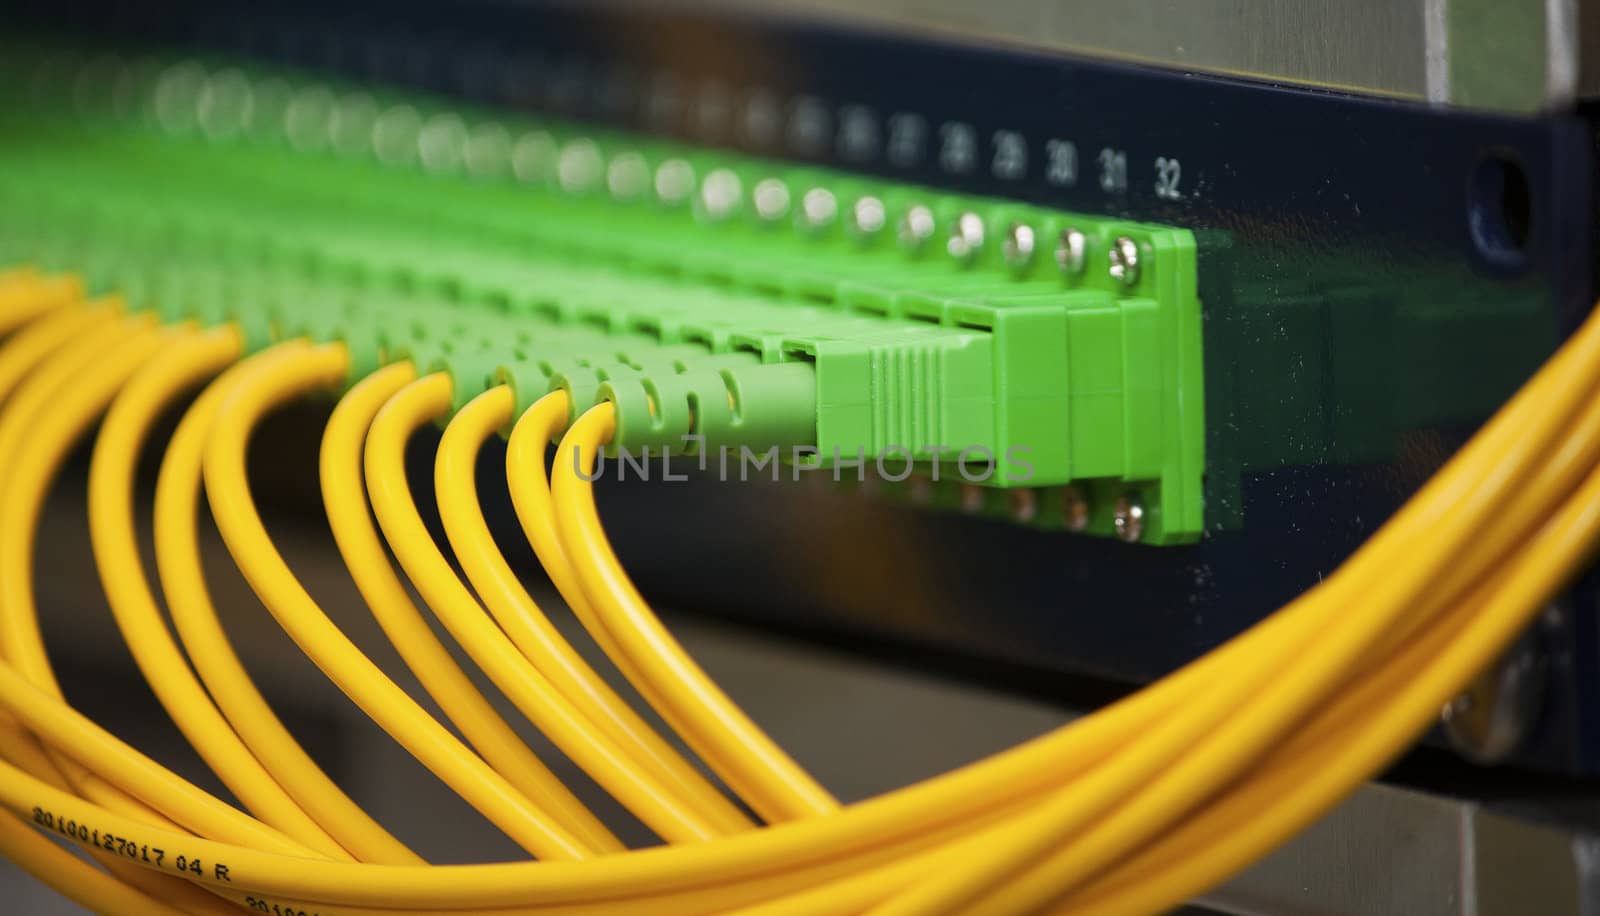 A fiber optics patch panel with fibers connected